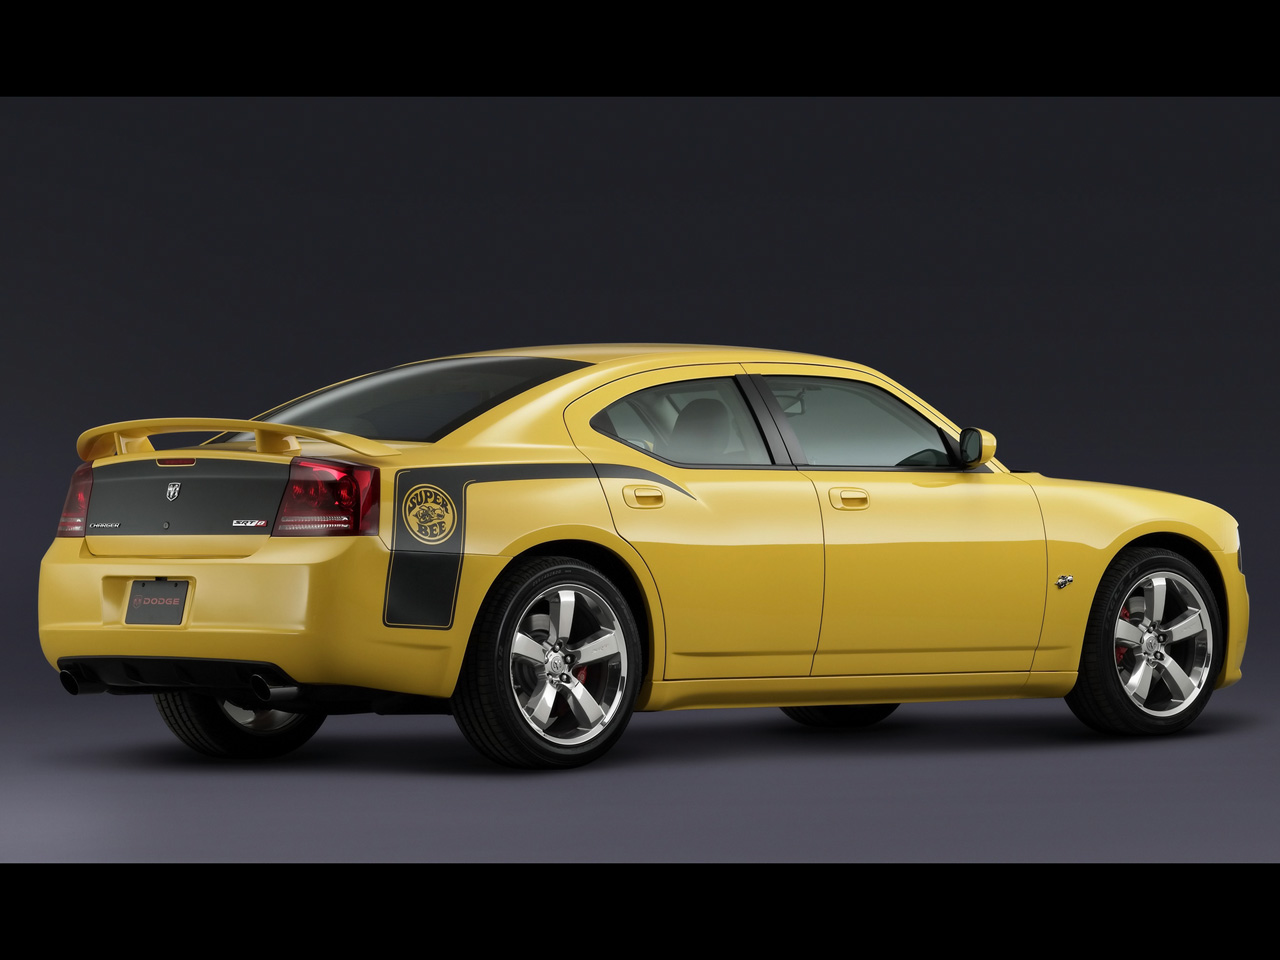 Nice Images Collection: Dodge Charger Super Bee Desktop Wallpapers